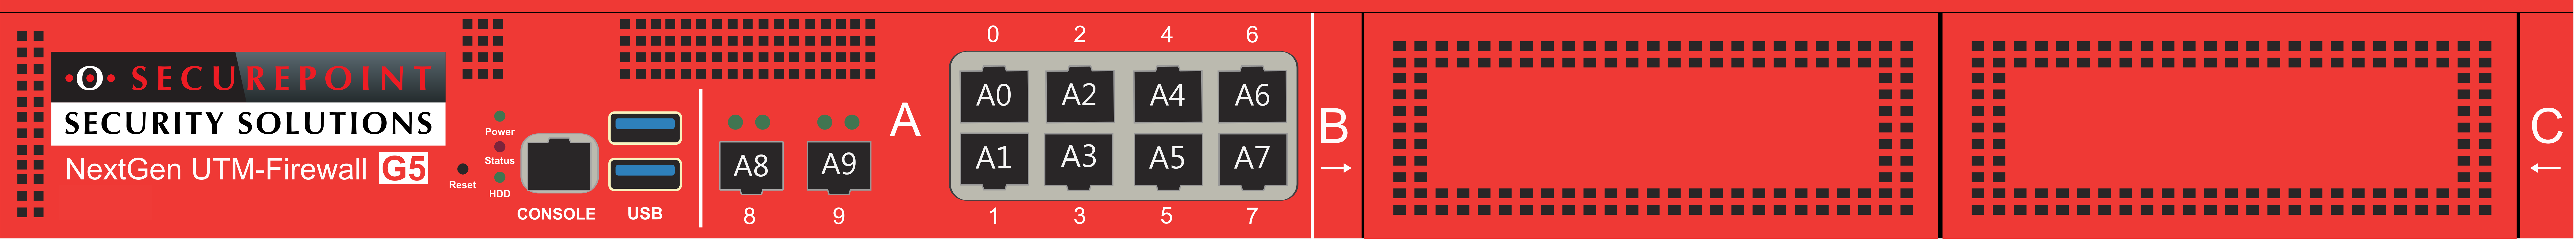 Datei:RC 350-1000 Slot A.png